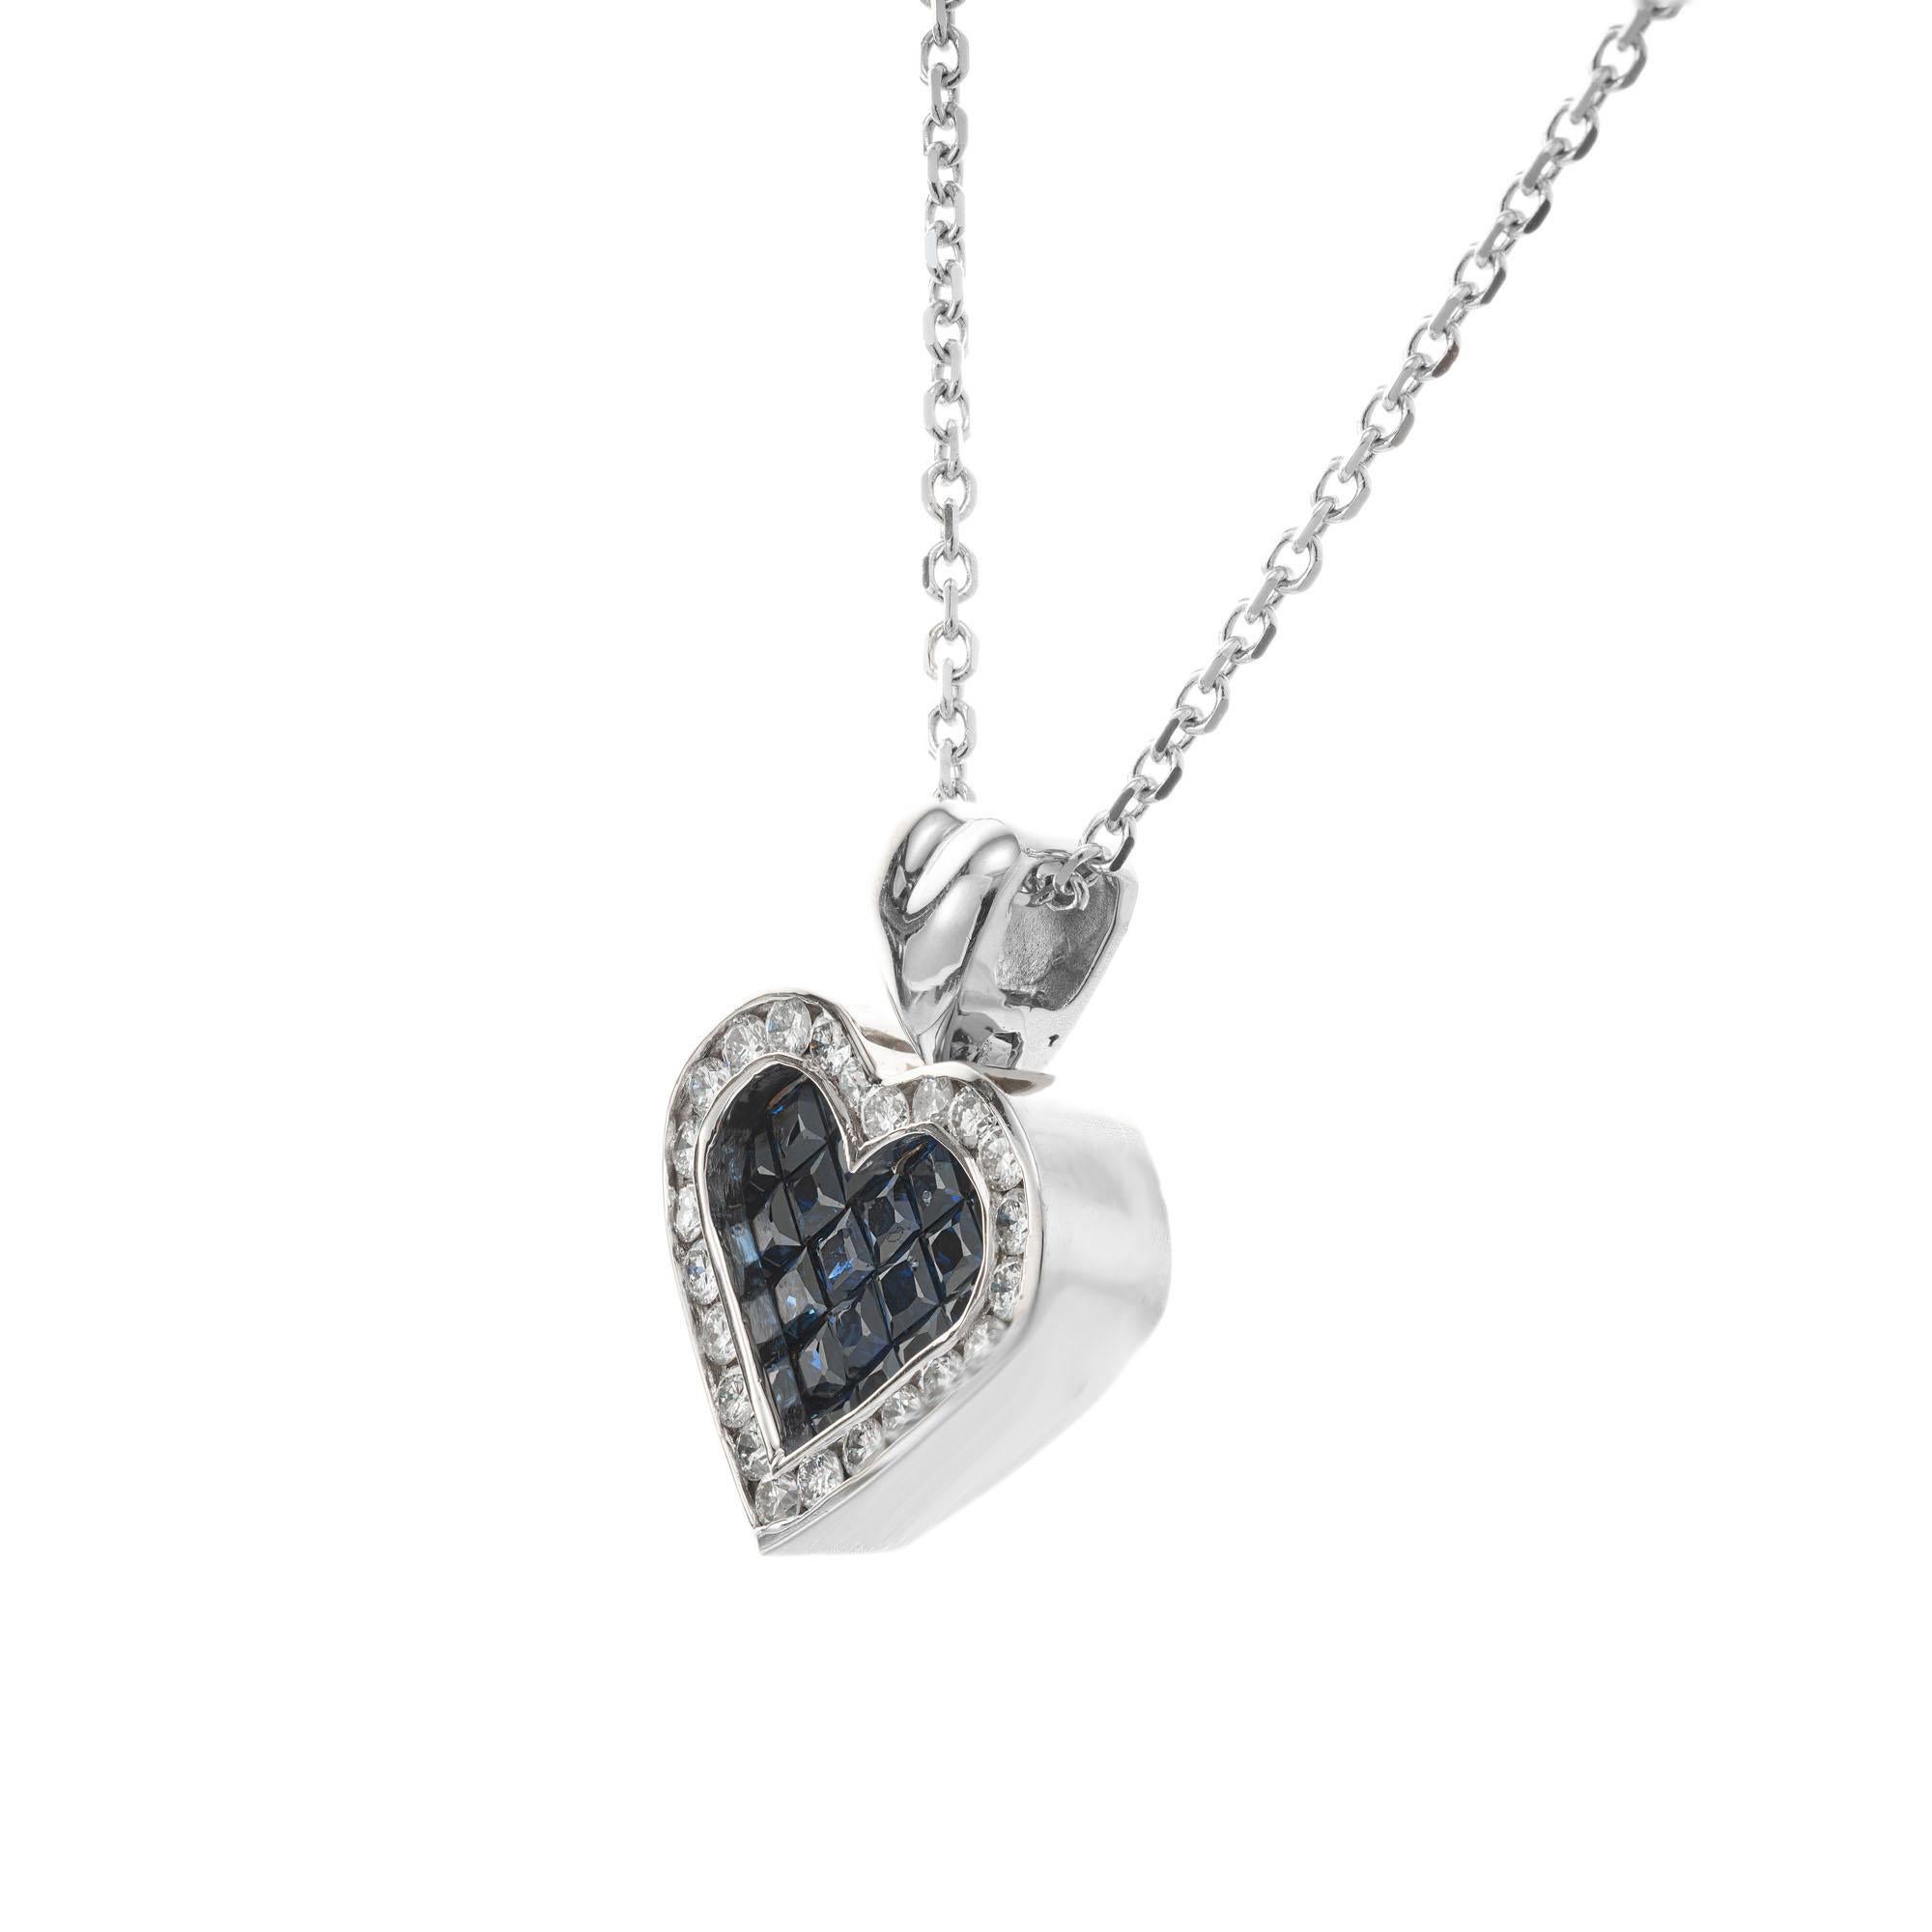 Sapphire and diamond heart pendant necklace. Invisible set blue square sapphire heart with a halo of round brilliant cut diamonds set in 18k white gold with a 16 inch 18k chain.

21 square cut blue sapphires, VS-SI approx. 1.00ct
23 round brilliant